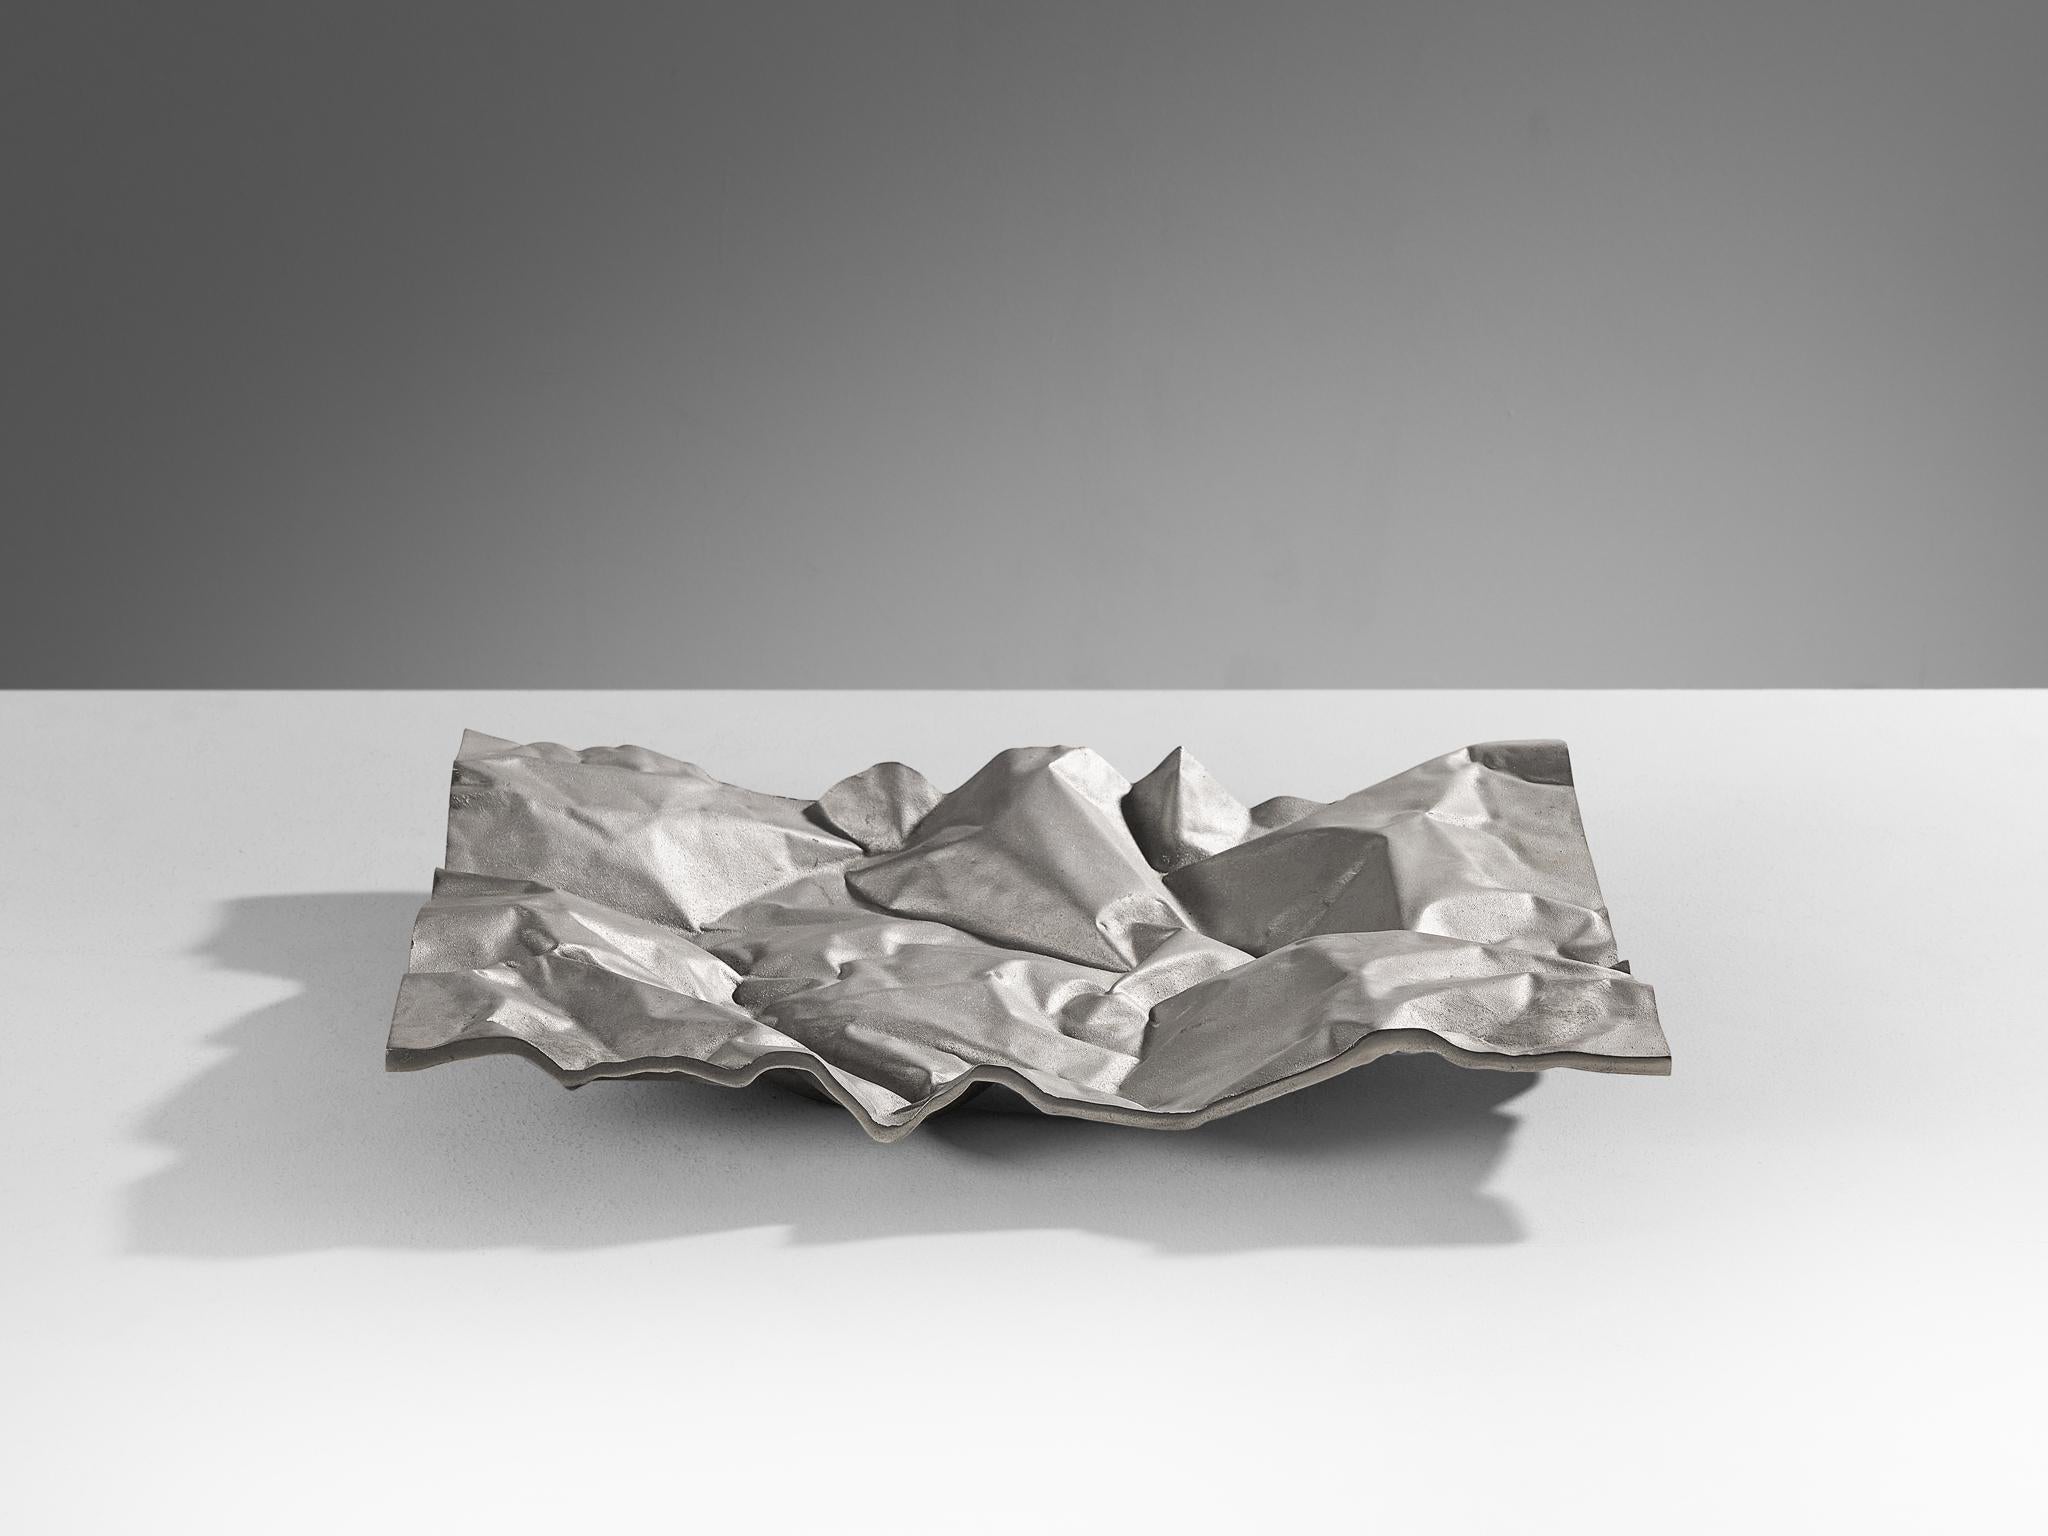 Nerone Ceccarelli e Giancarlo Patuzzi for Gruppo NP2, centerpiece, aluminum, Italy, design 1971

Interesting and contemporary table piece designed by Gruppo NP2 in 1971. This piece has the appearance of a soft crumpled material, but is in fact made